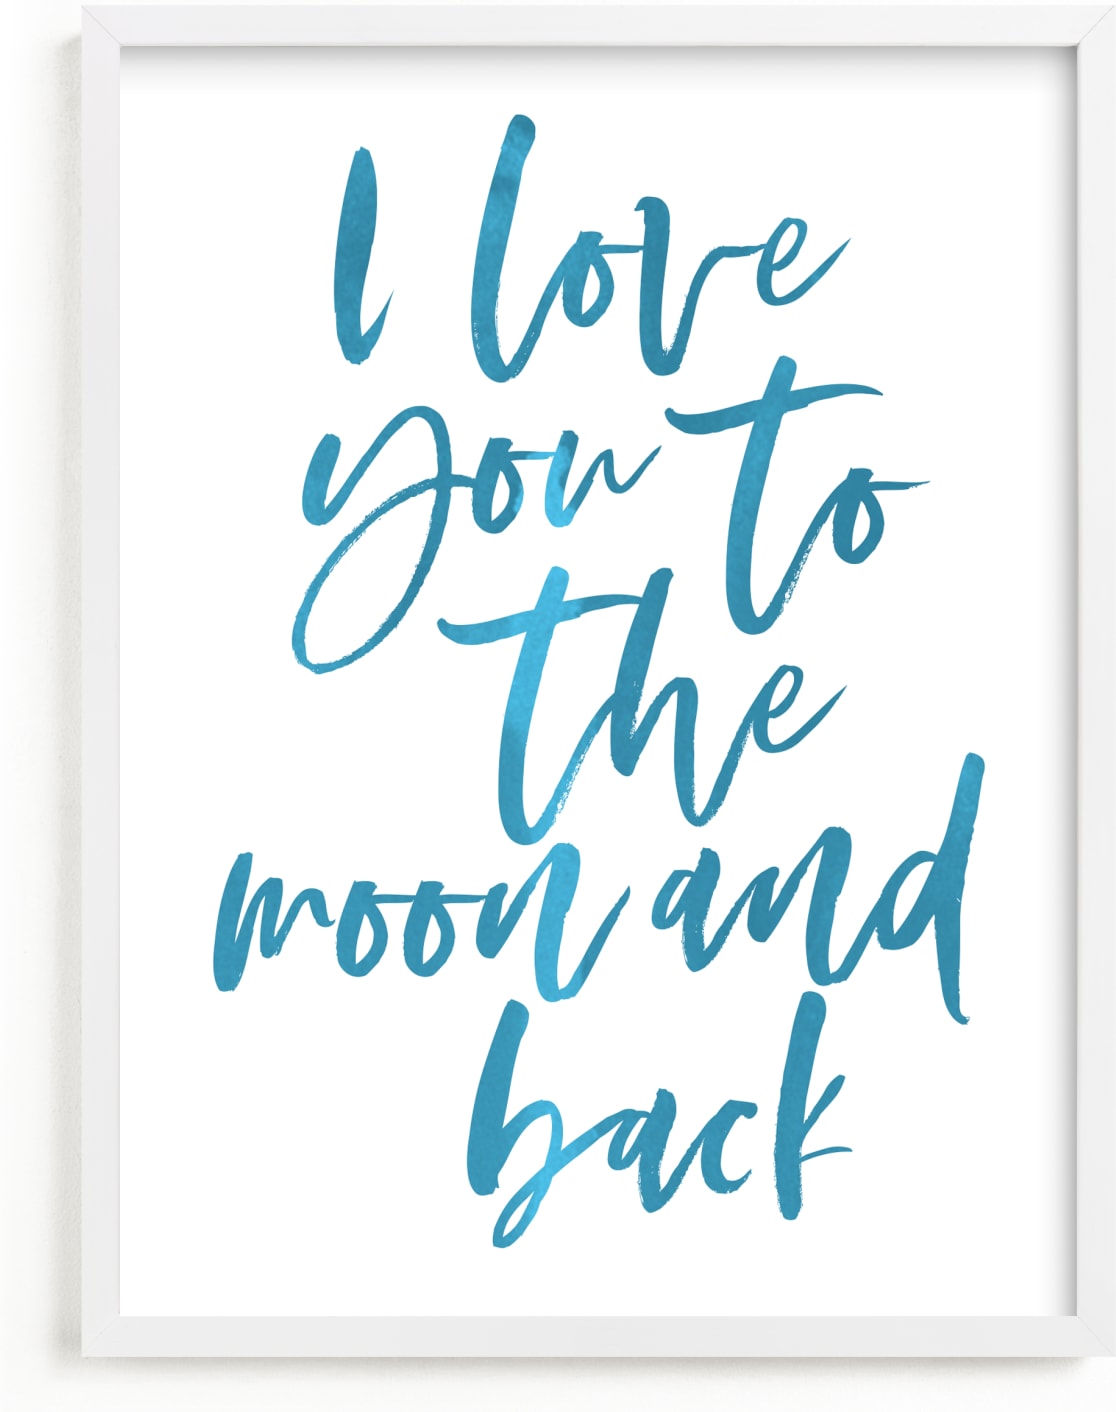 This is a blue nursery wall art by Caitlin Considine called I love you to the moon and back.